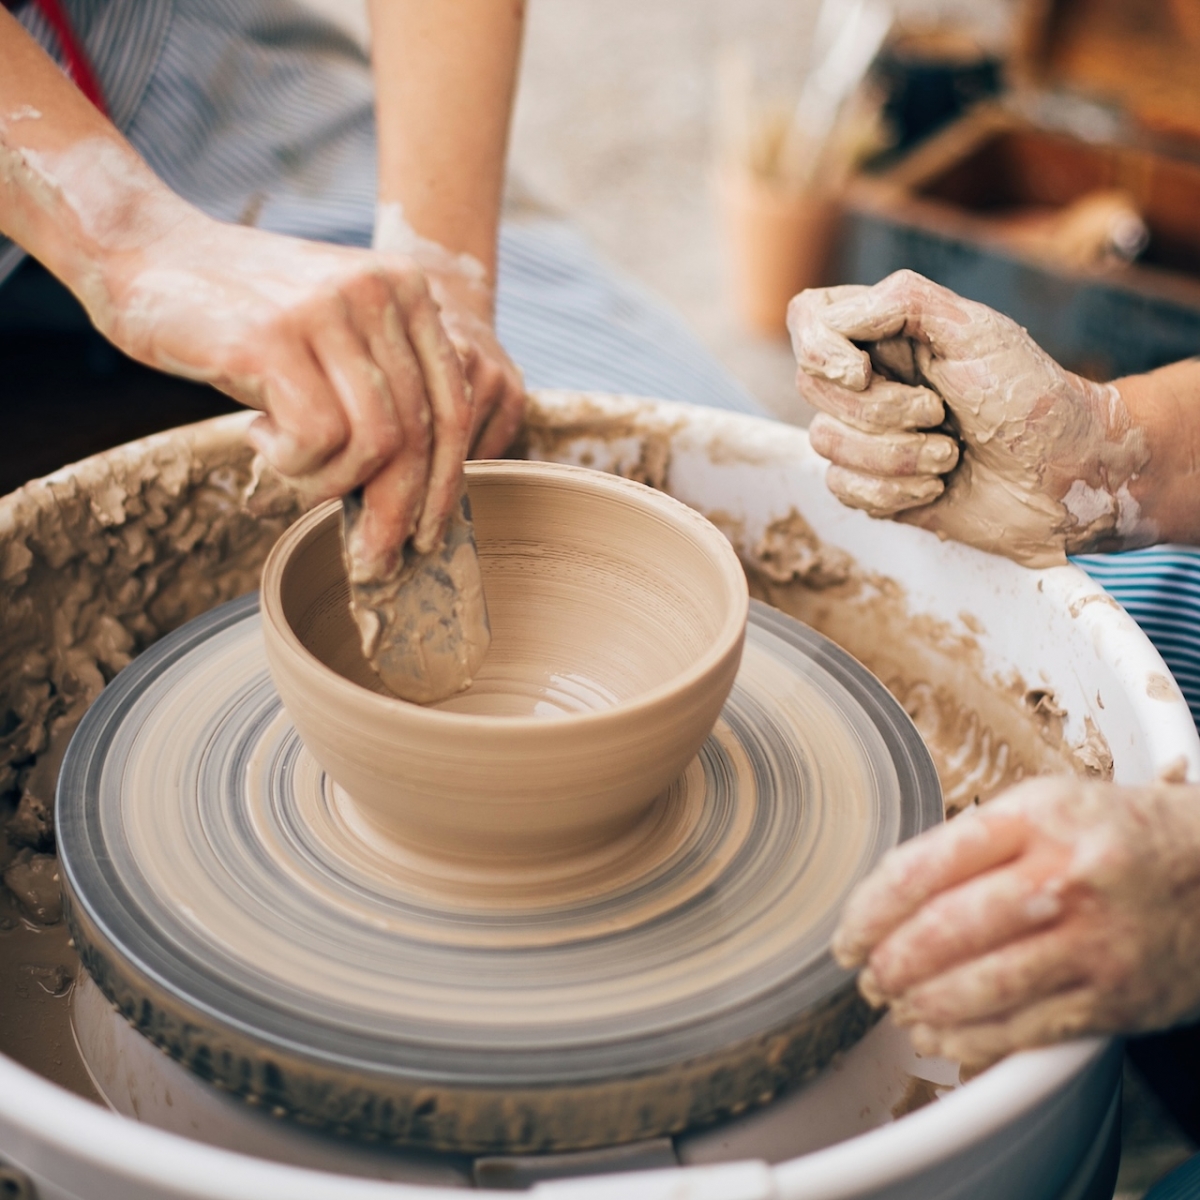 Pottery Workshop in Le Havre, Normandy